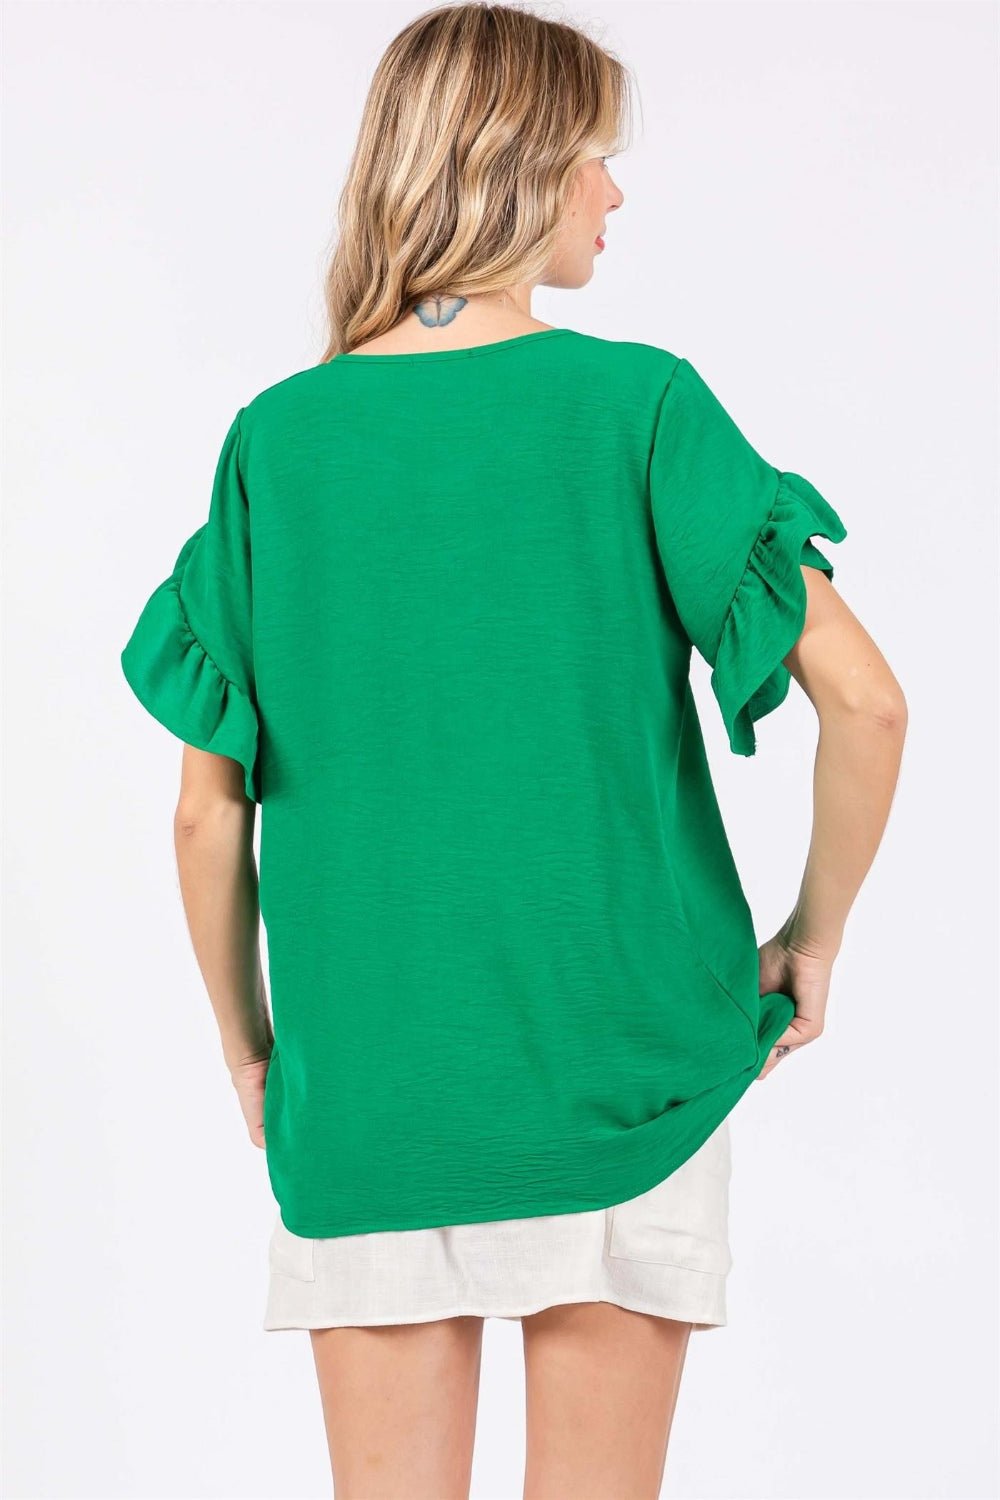 Ruffled Short Sleeve V-Neck Blouse in Kelly GreenBlouseGeeGee